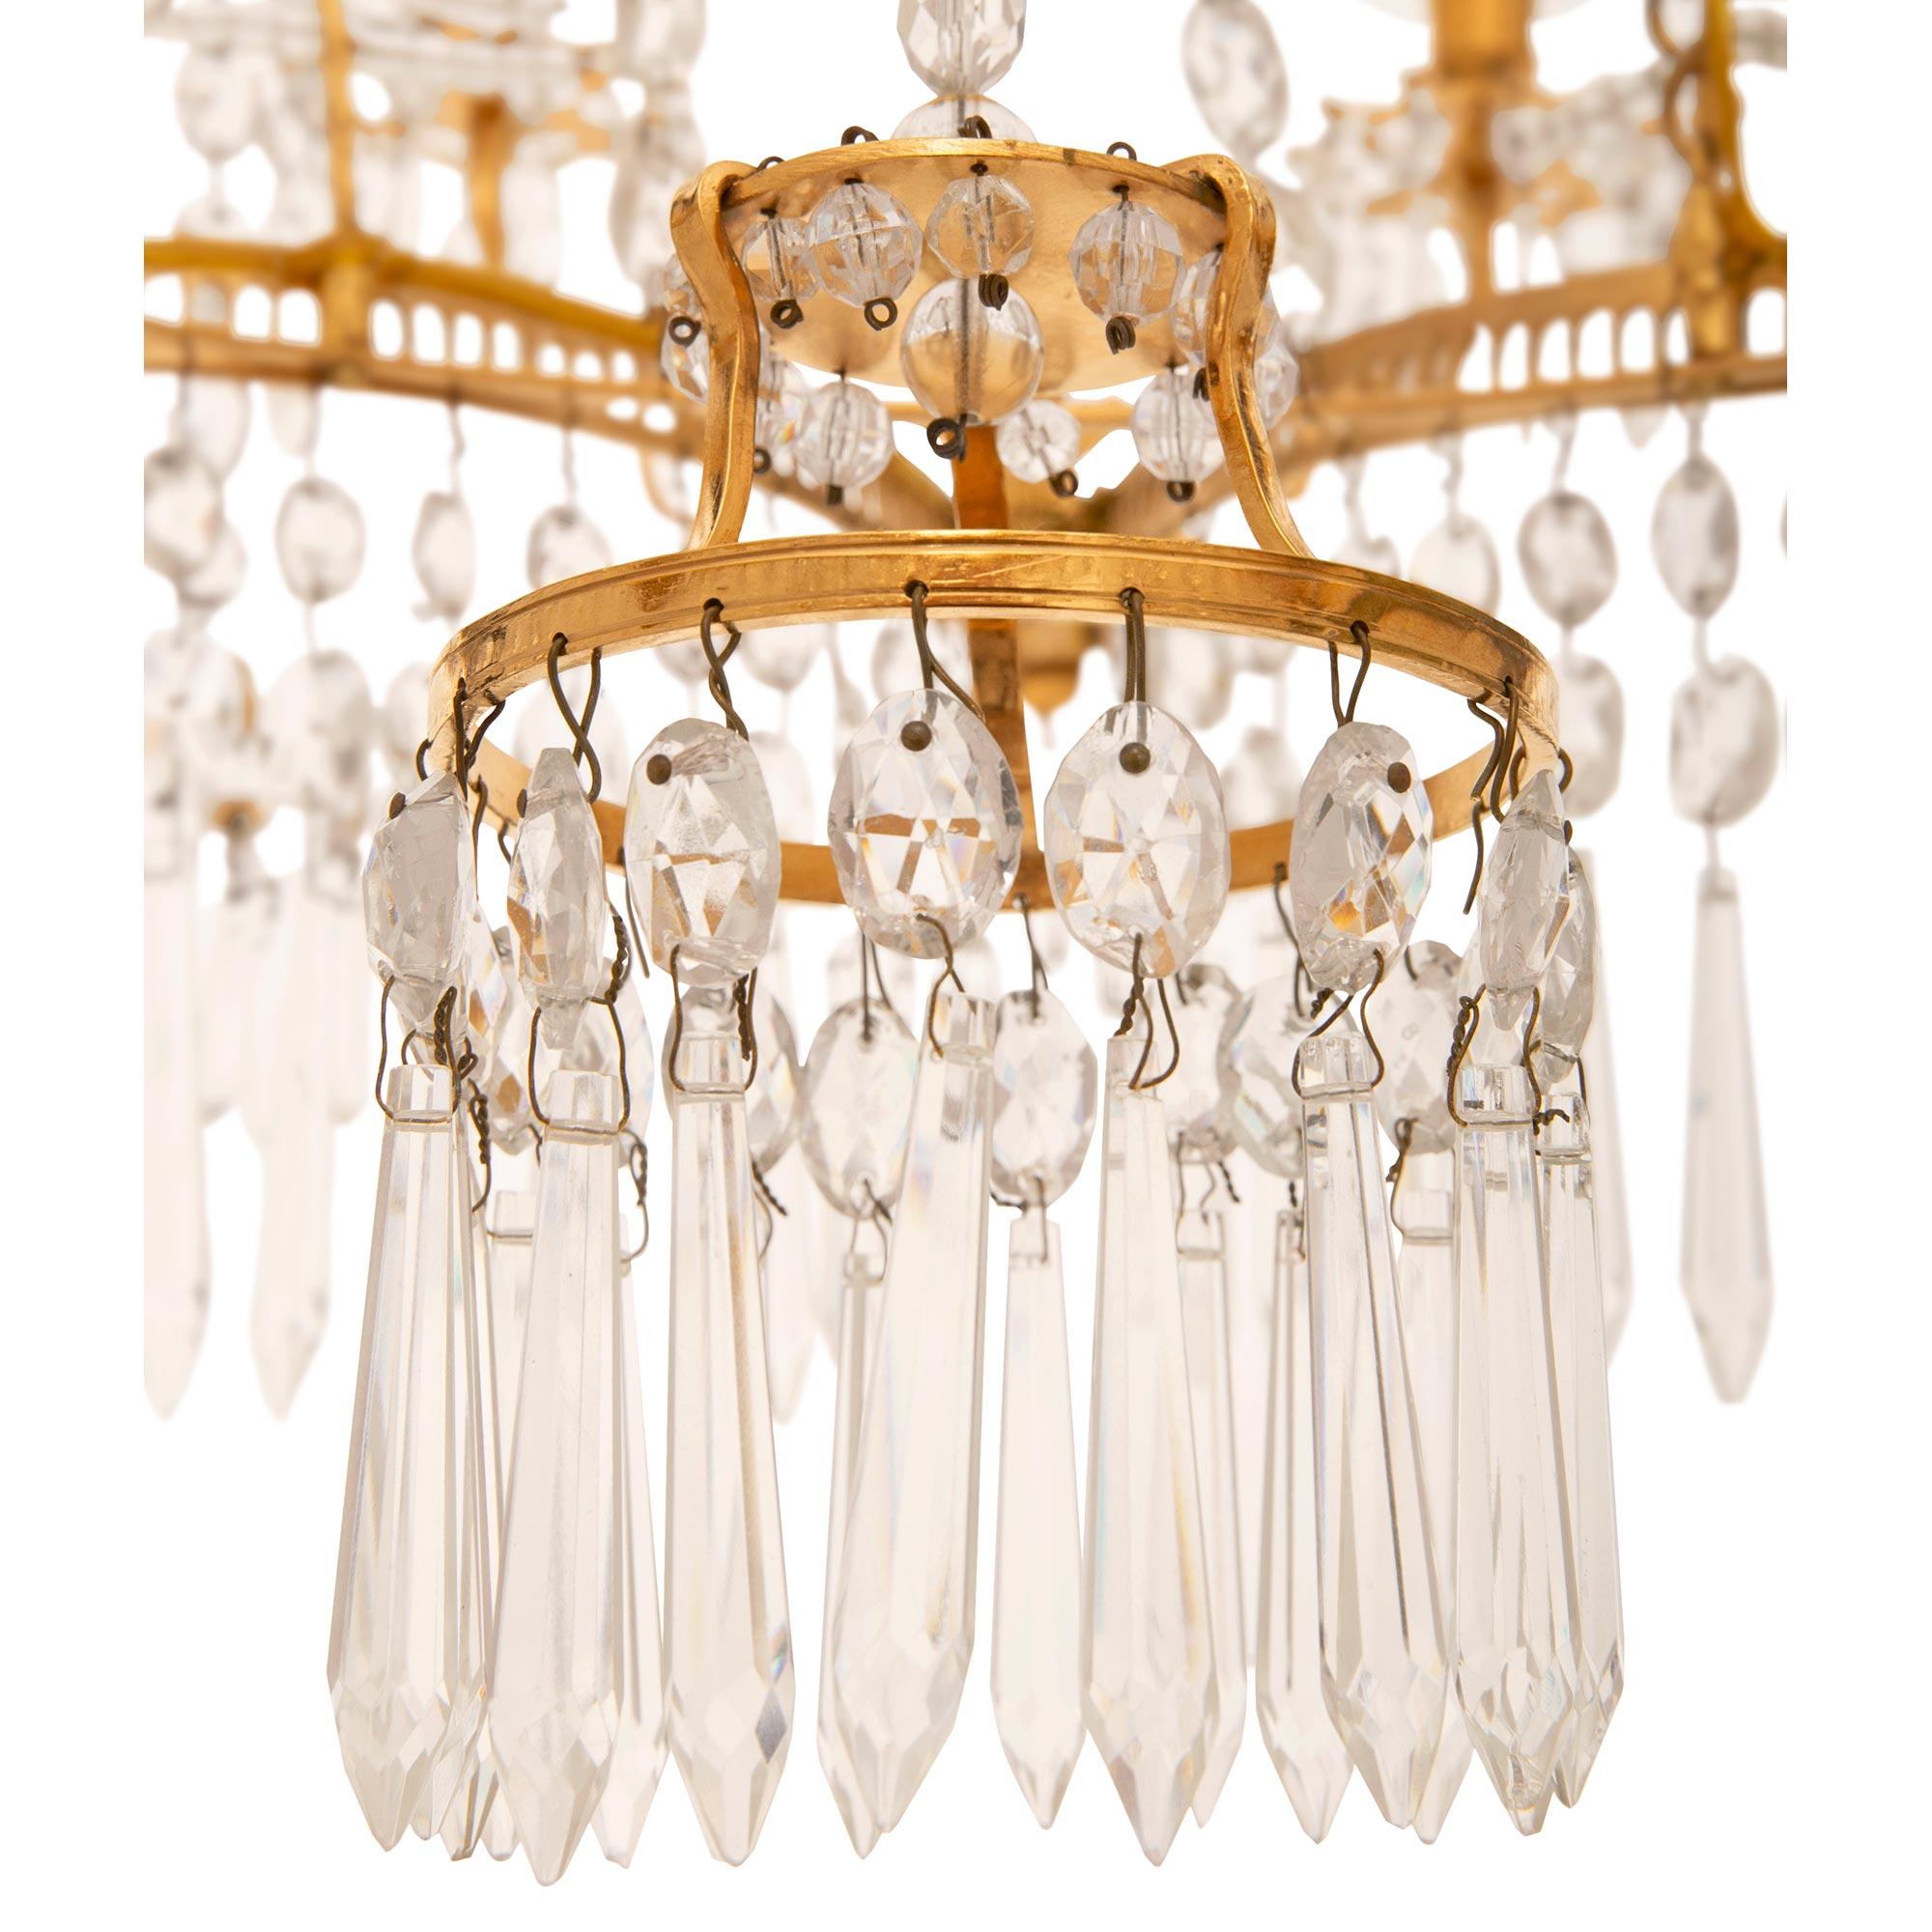 Baltic 19th century Ormolu and cut glass chandelier For Sale 1